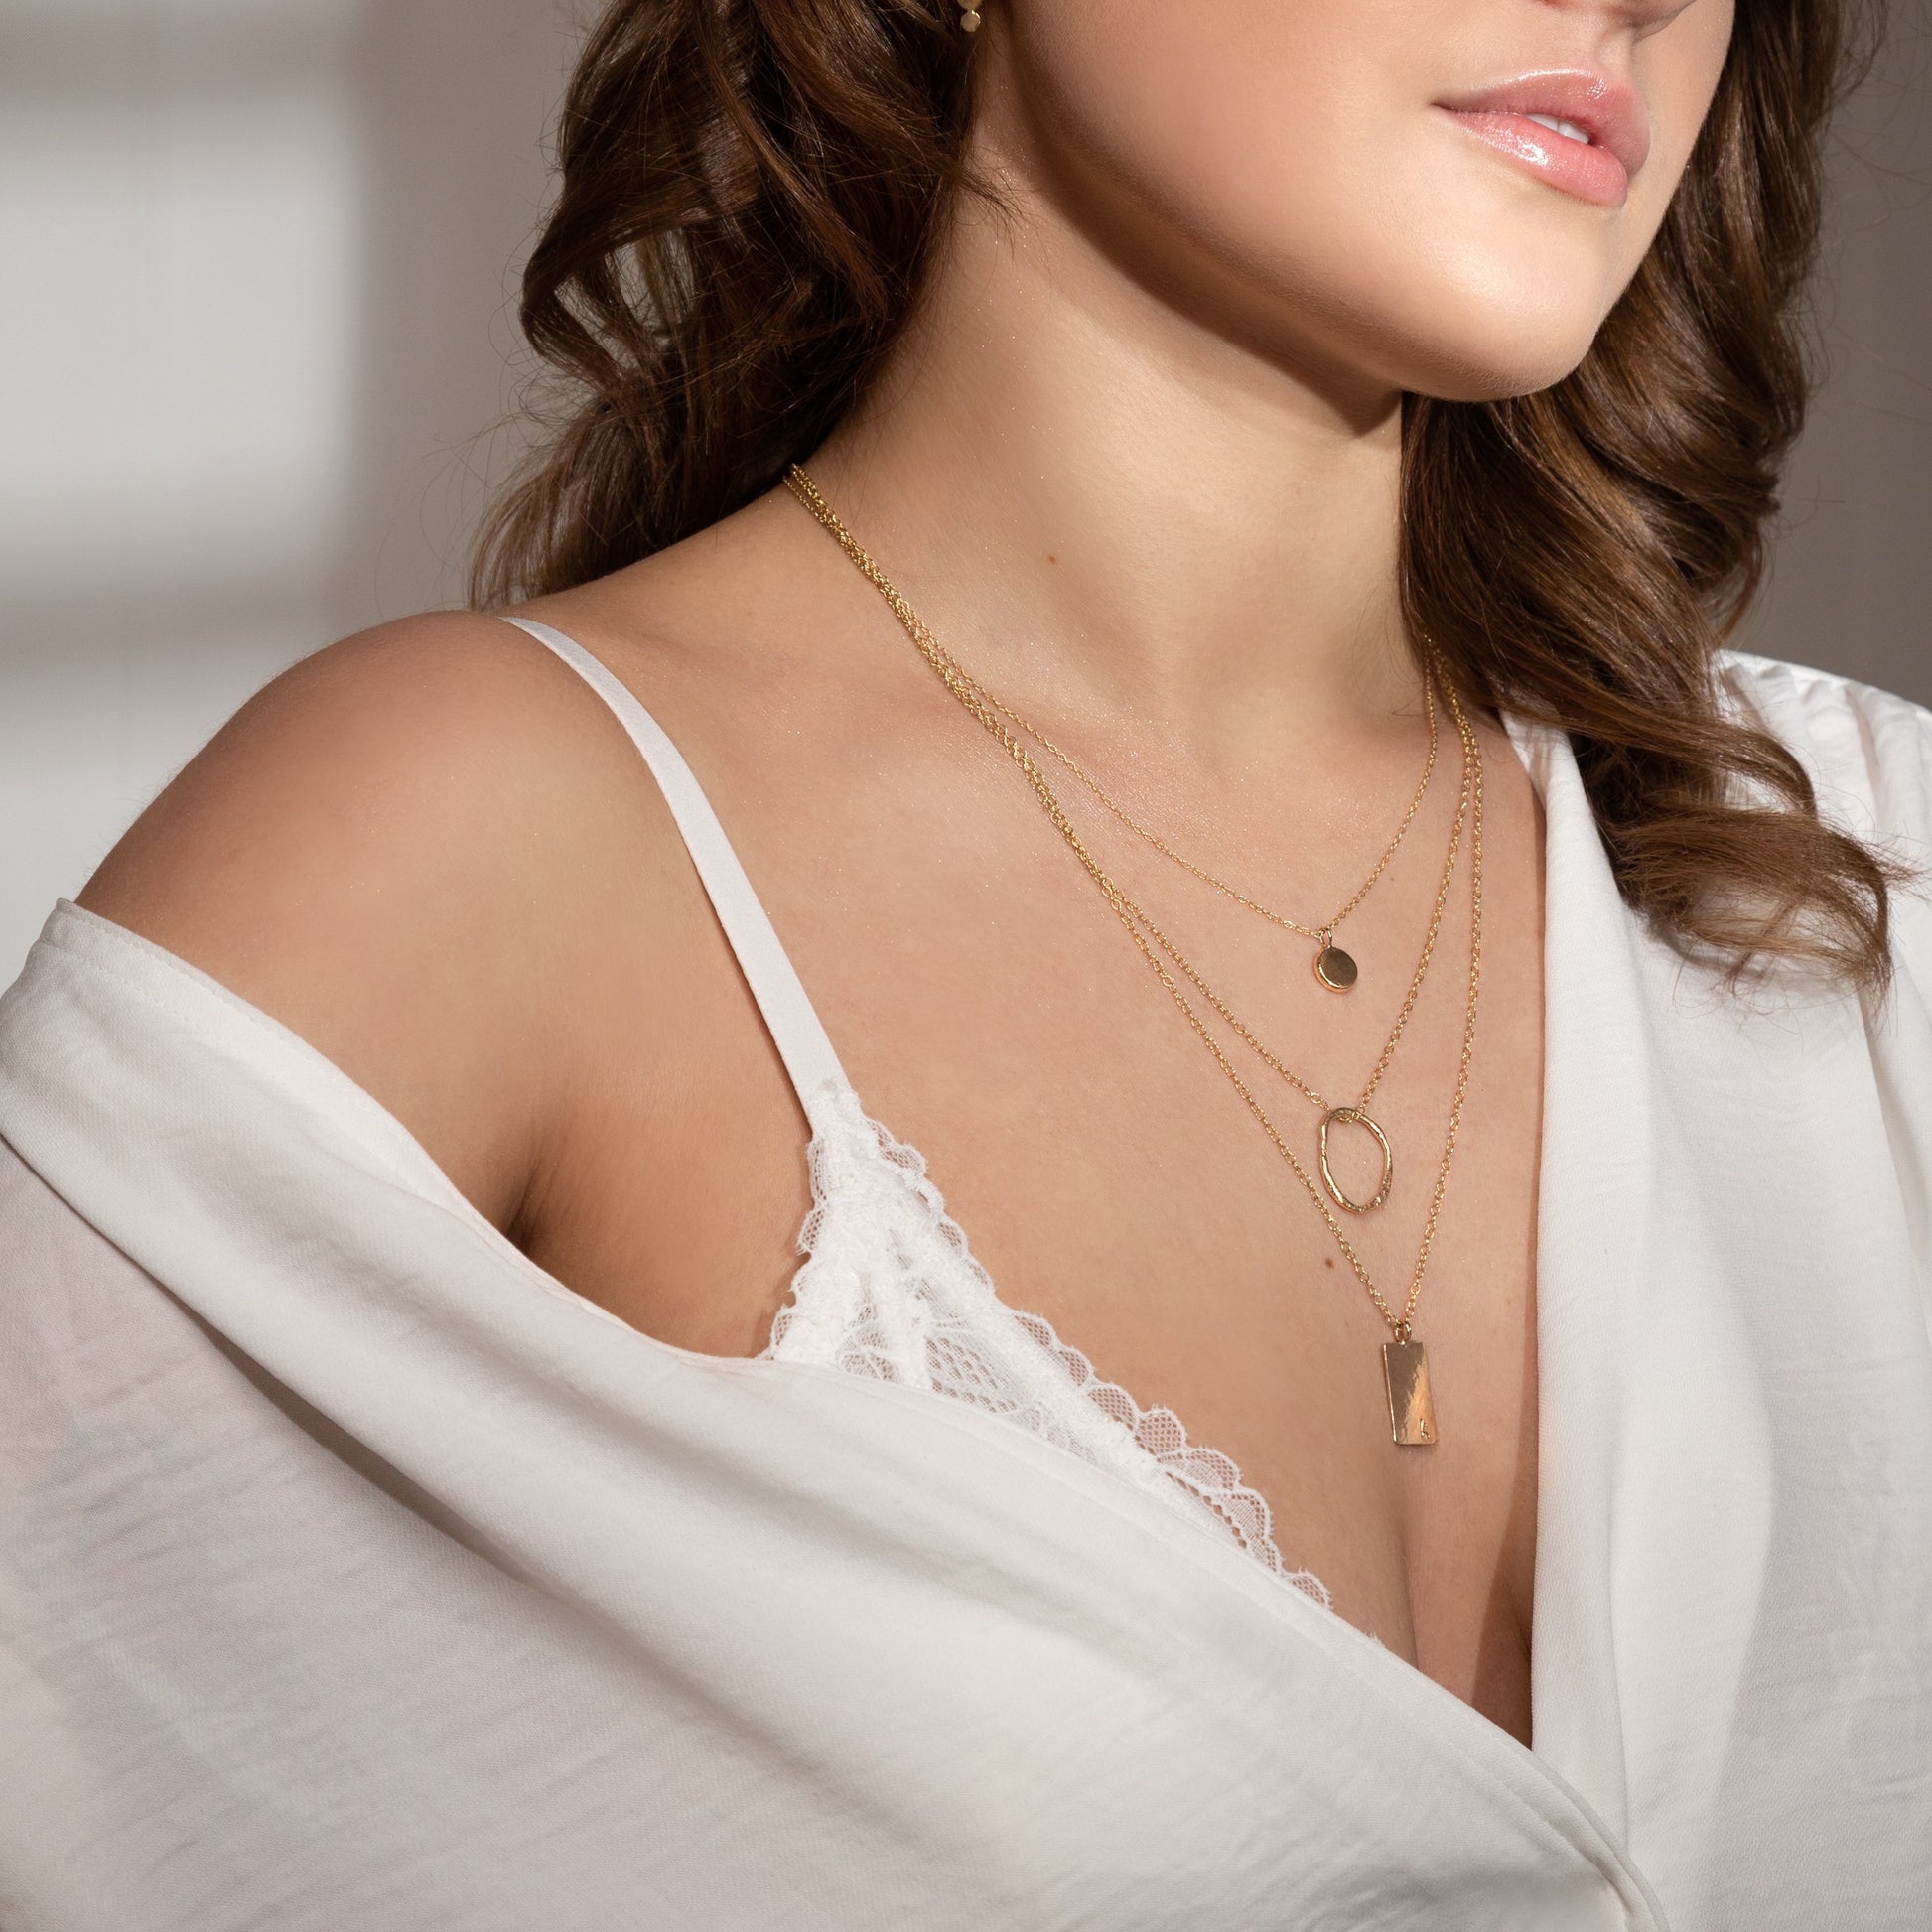 MUKA studio gold dot necklace layered with molten oval necklace and personalised initial necklace